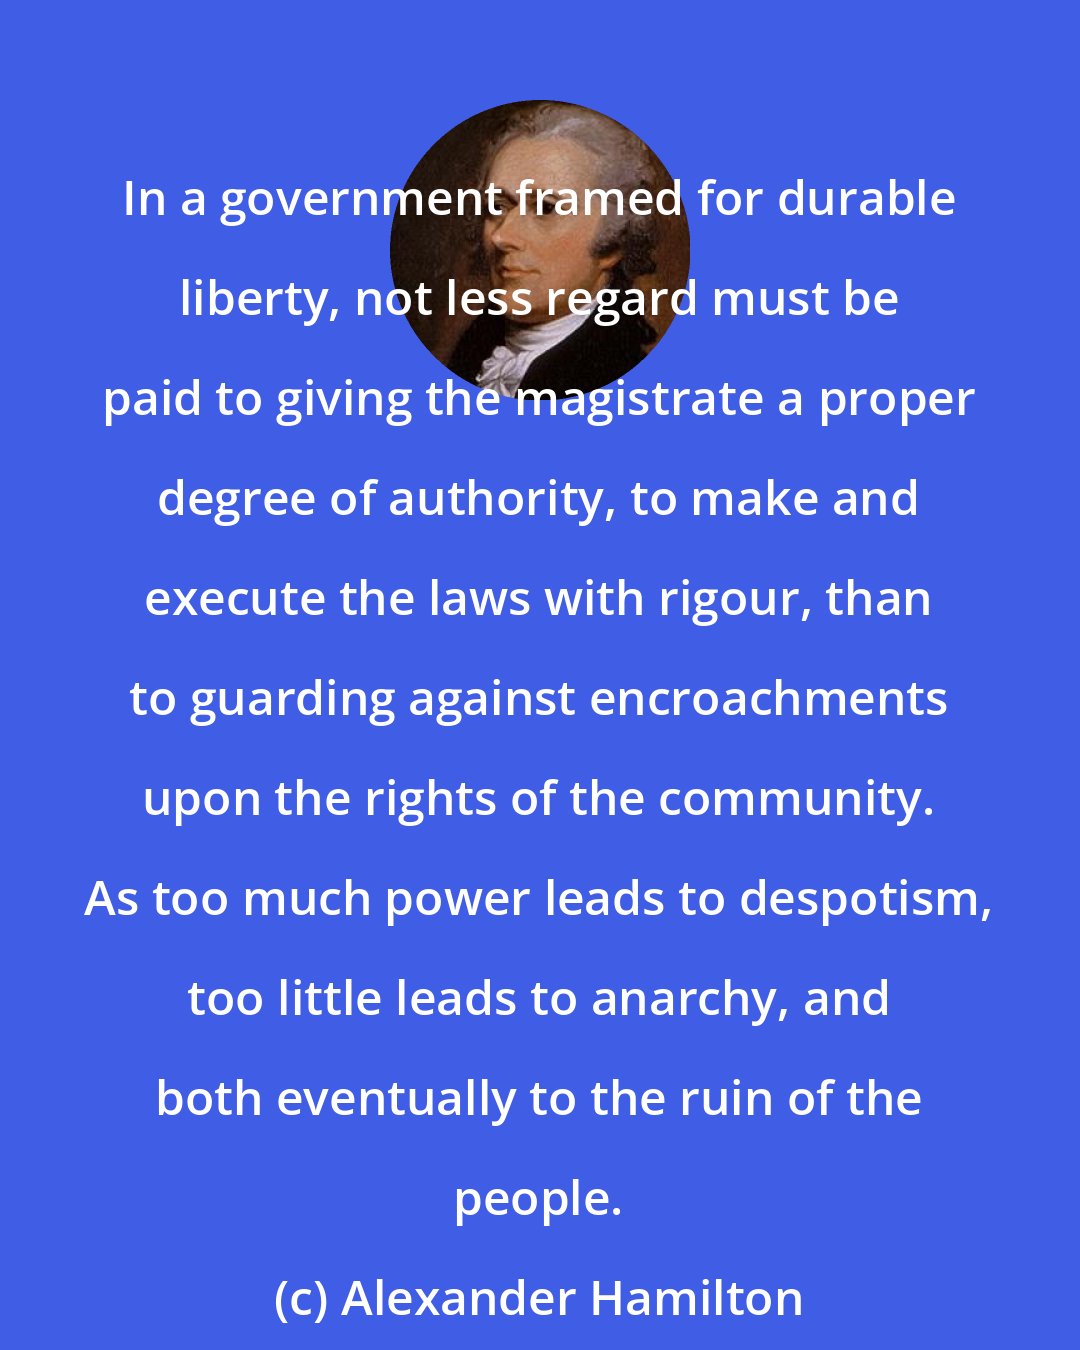 Alexander Hamilton: In a government framed for durable liberty, not less regard must be paid to giving the magistrate a proper degree of authority, to make and execute the laws with rigour, than to guarding against encroachments upon the rights of the community. As too much power leads to despotism, too little leads to anarchy, and both eventually to the ruin of the people.